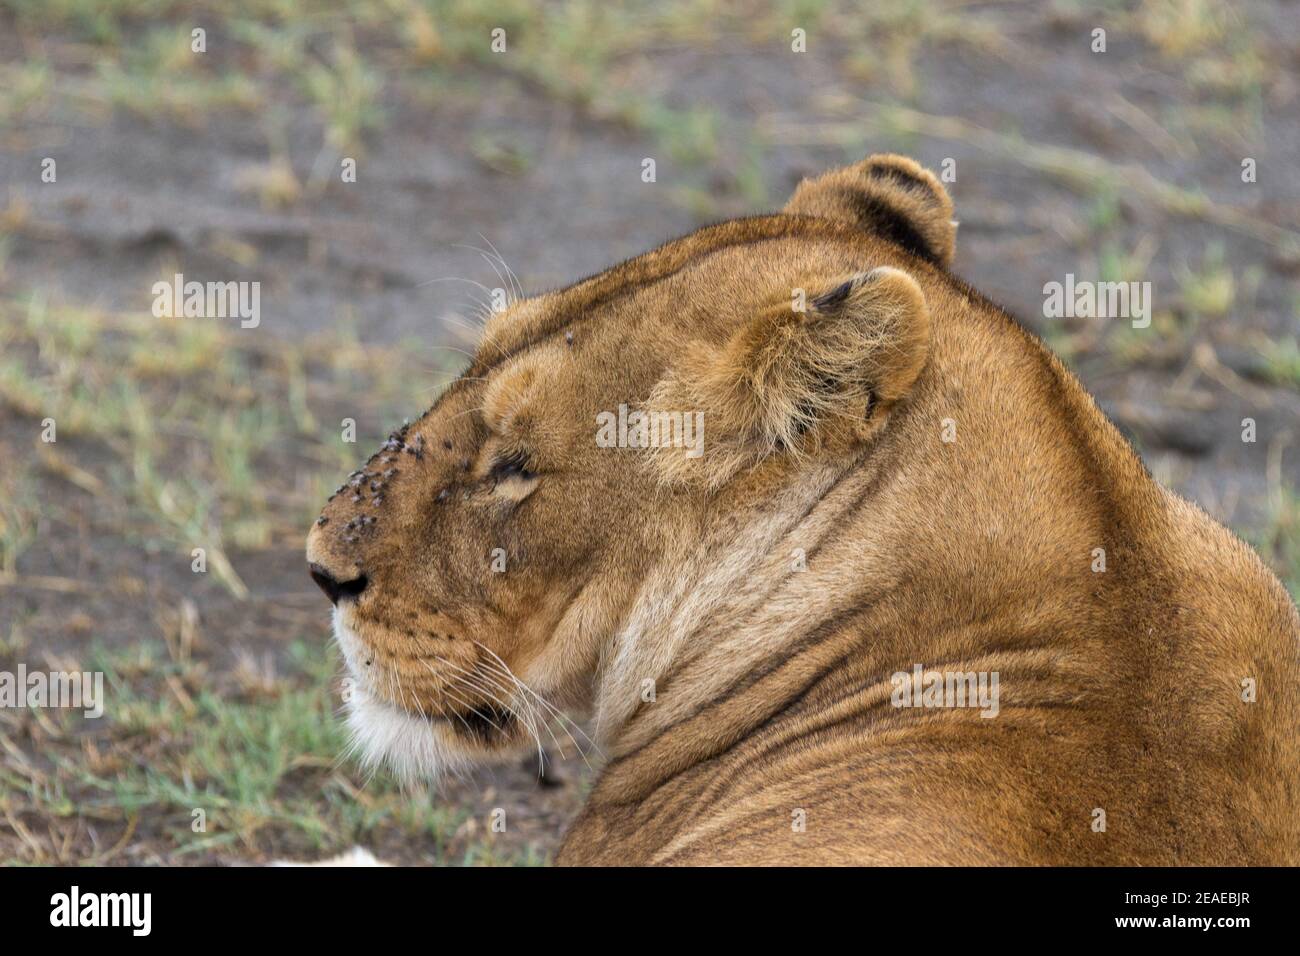 A shot of a lioness covered by flies in Africa. Stock Photo